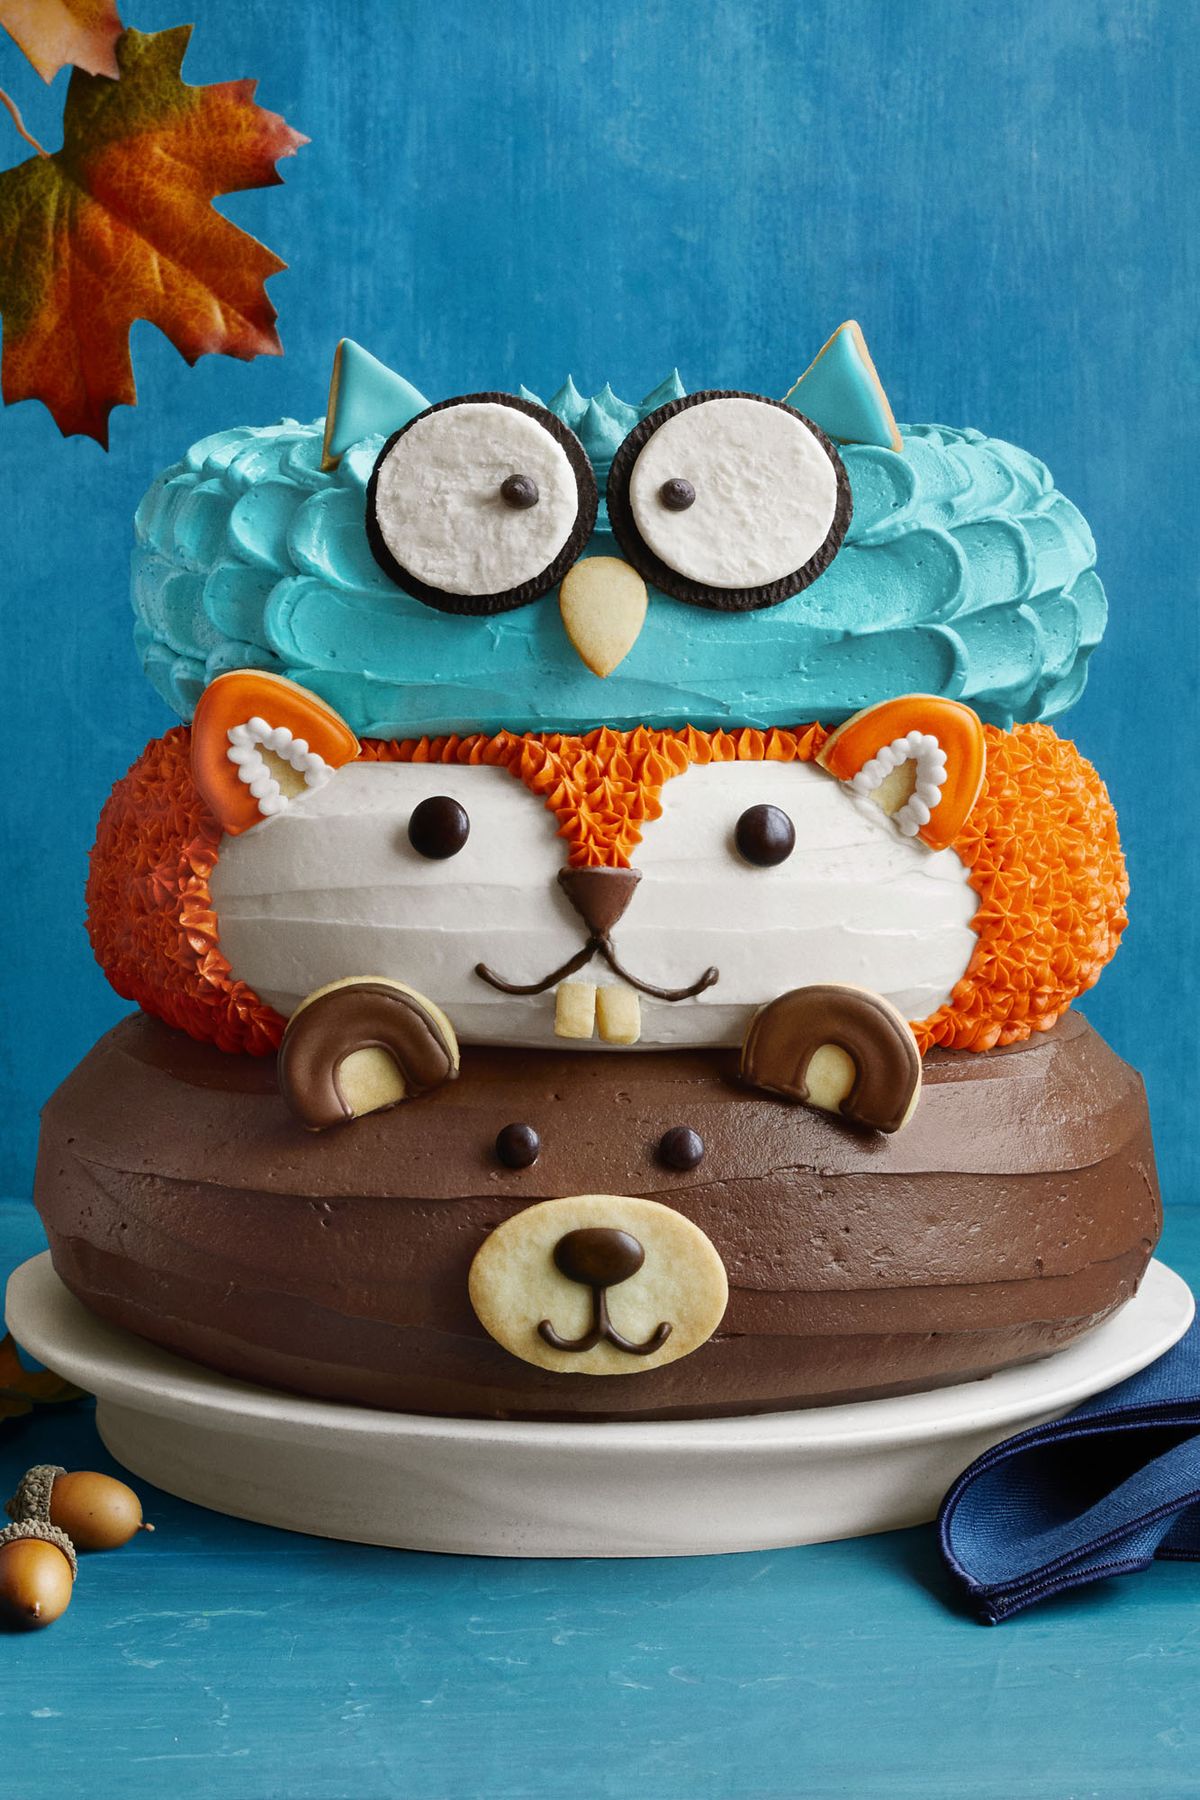 Best Forest Friends Cake Recipe - How to Make Forest Friends Cake